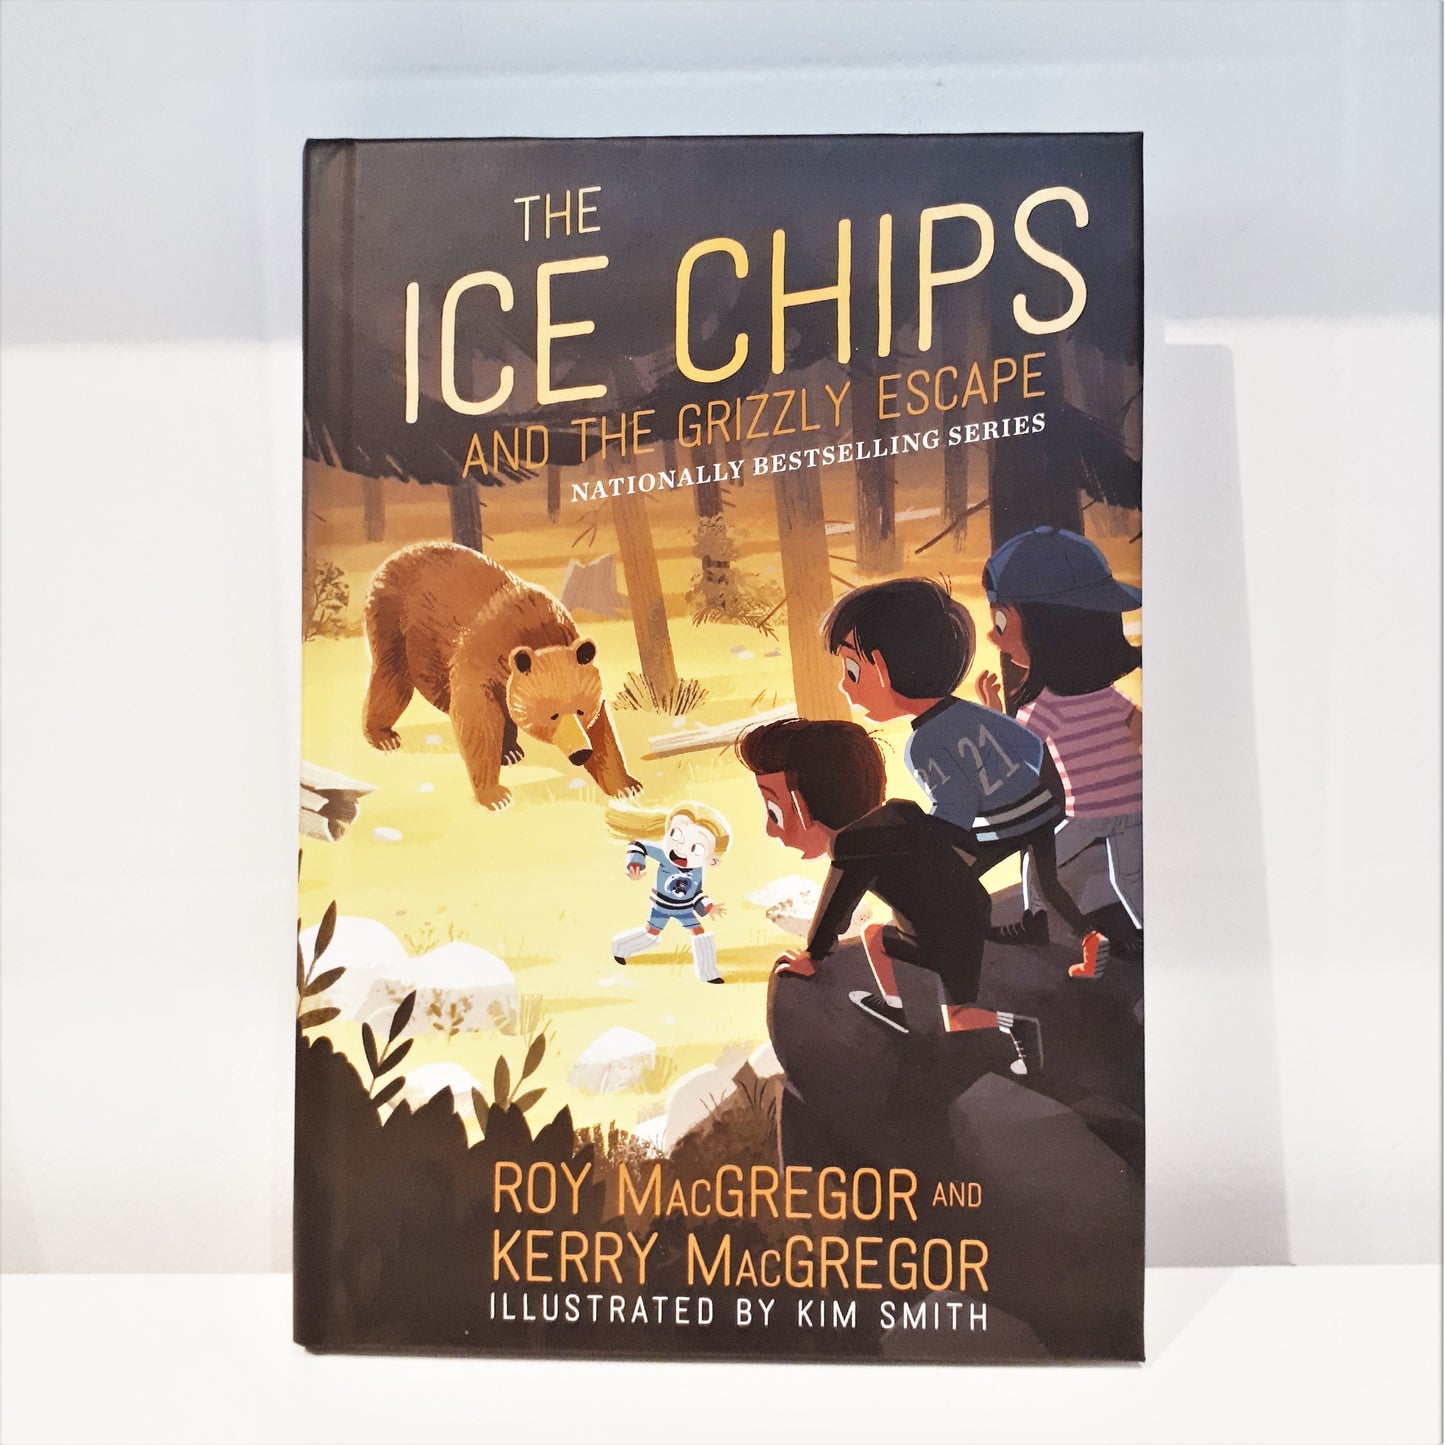 The Ice Chips and the Grizzly Escape by Roy MacGregor and Kerry MacGregor